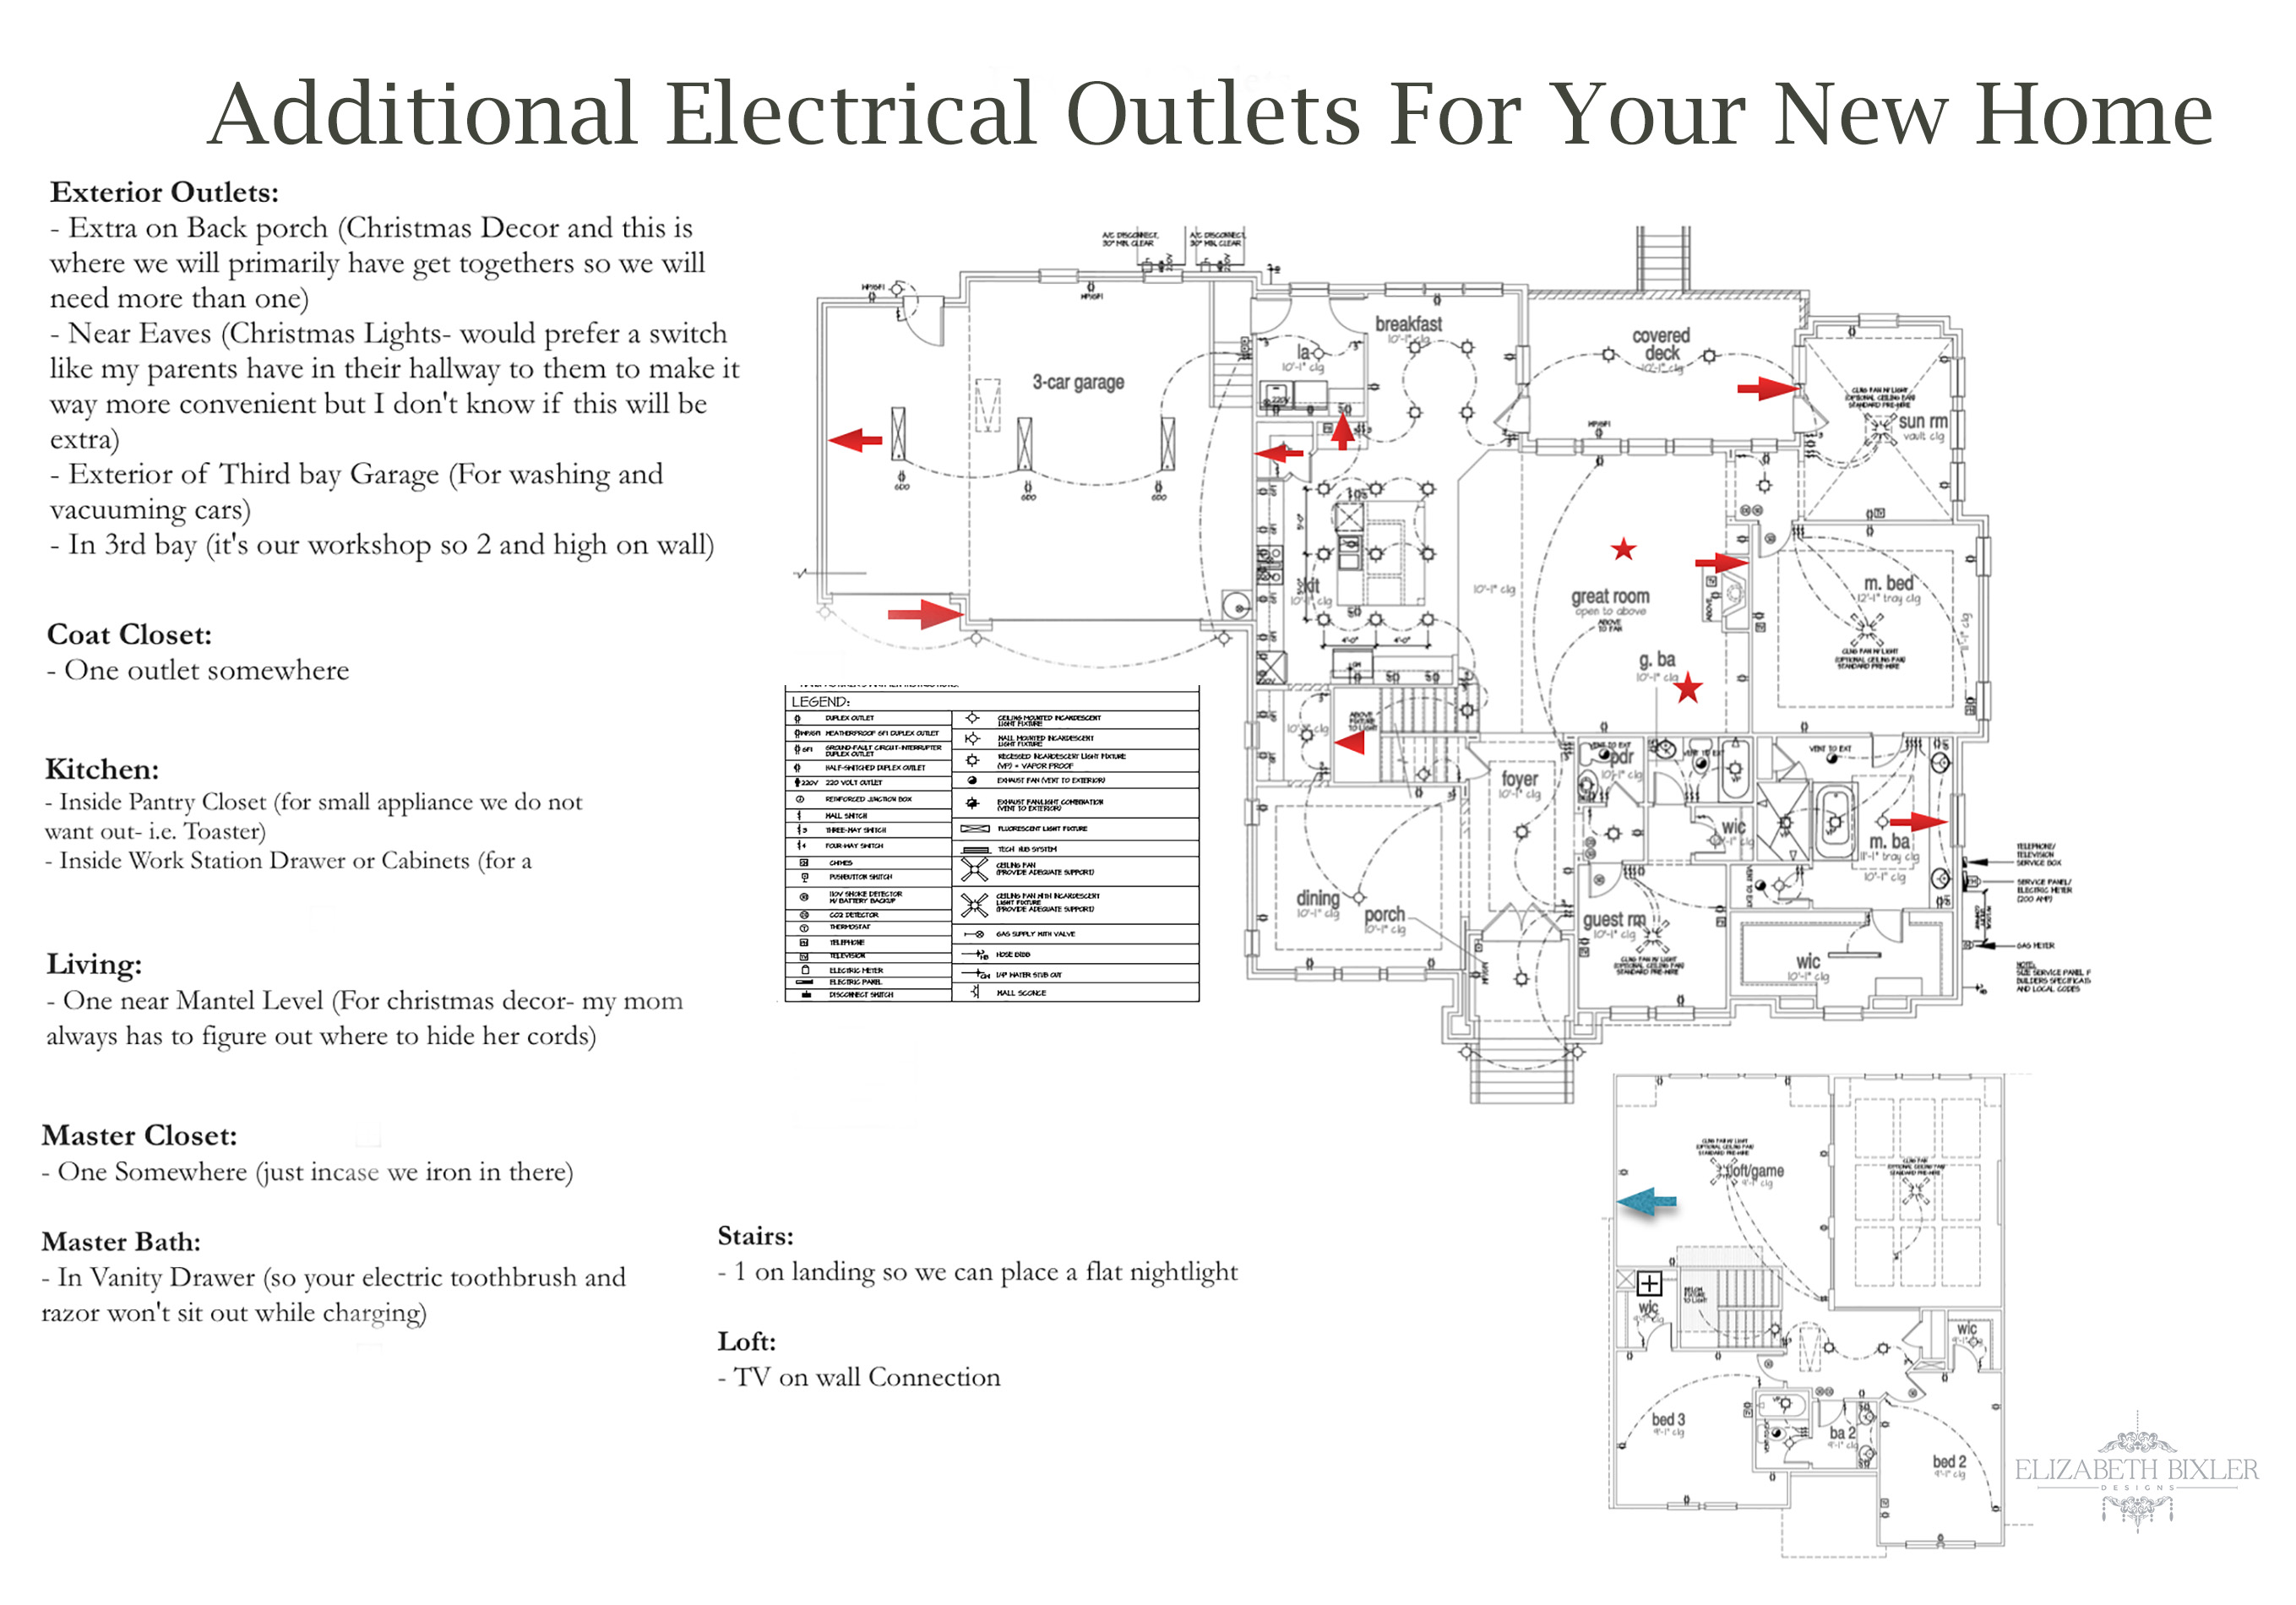 Important Electrical Outlets to Your Home